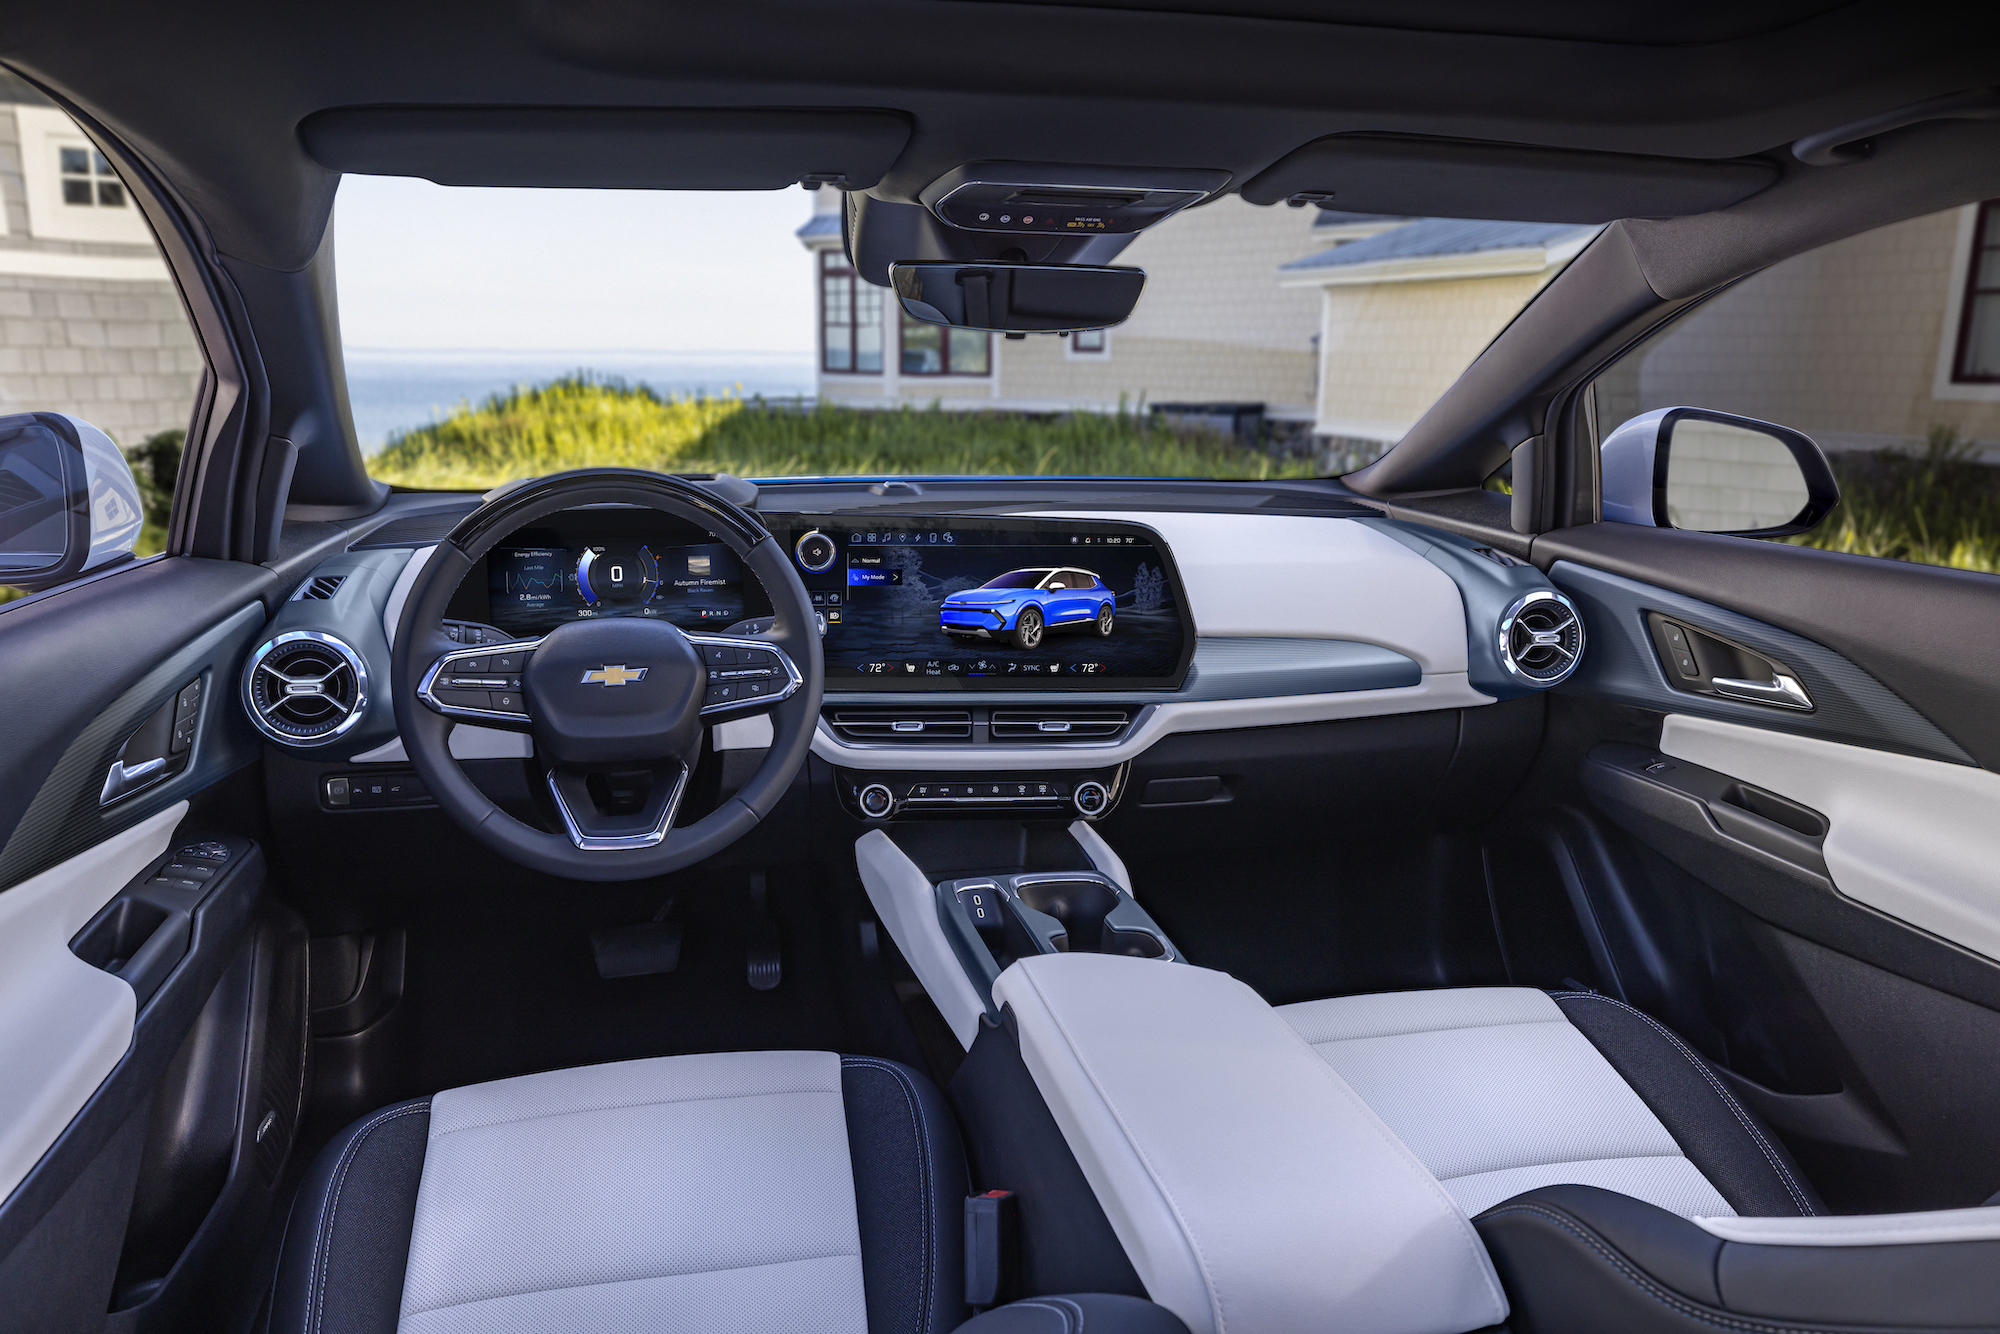 GM targets the masses with its $30,000 all-electric Chevrolet Equinox SUV |  TechCrunch